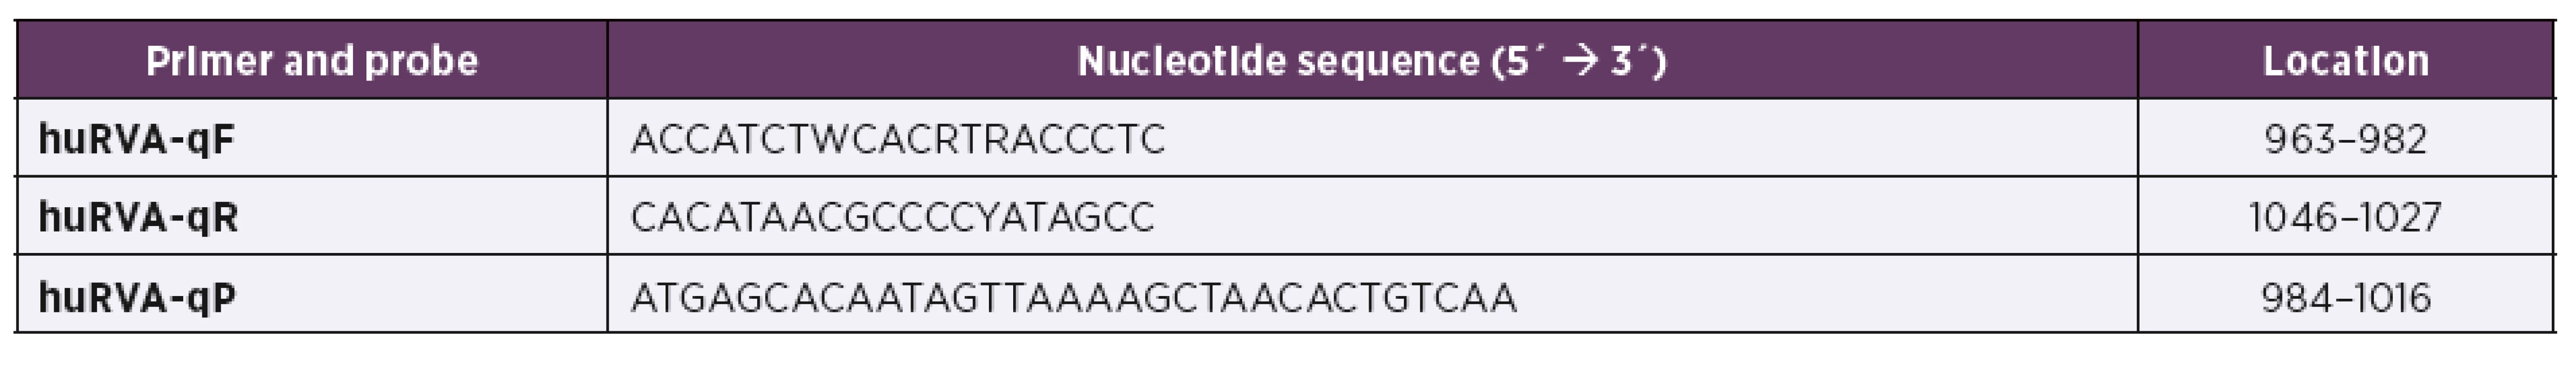 Sequence of primers and a probe used in the in-house RT-qPCR and their location in RVA NSP3 region (GenBank accession number
X81436)